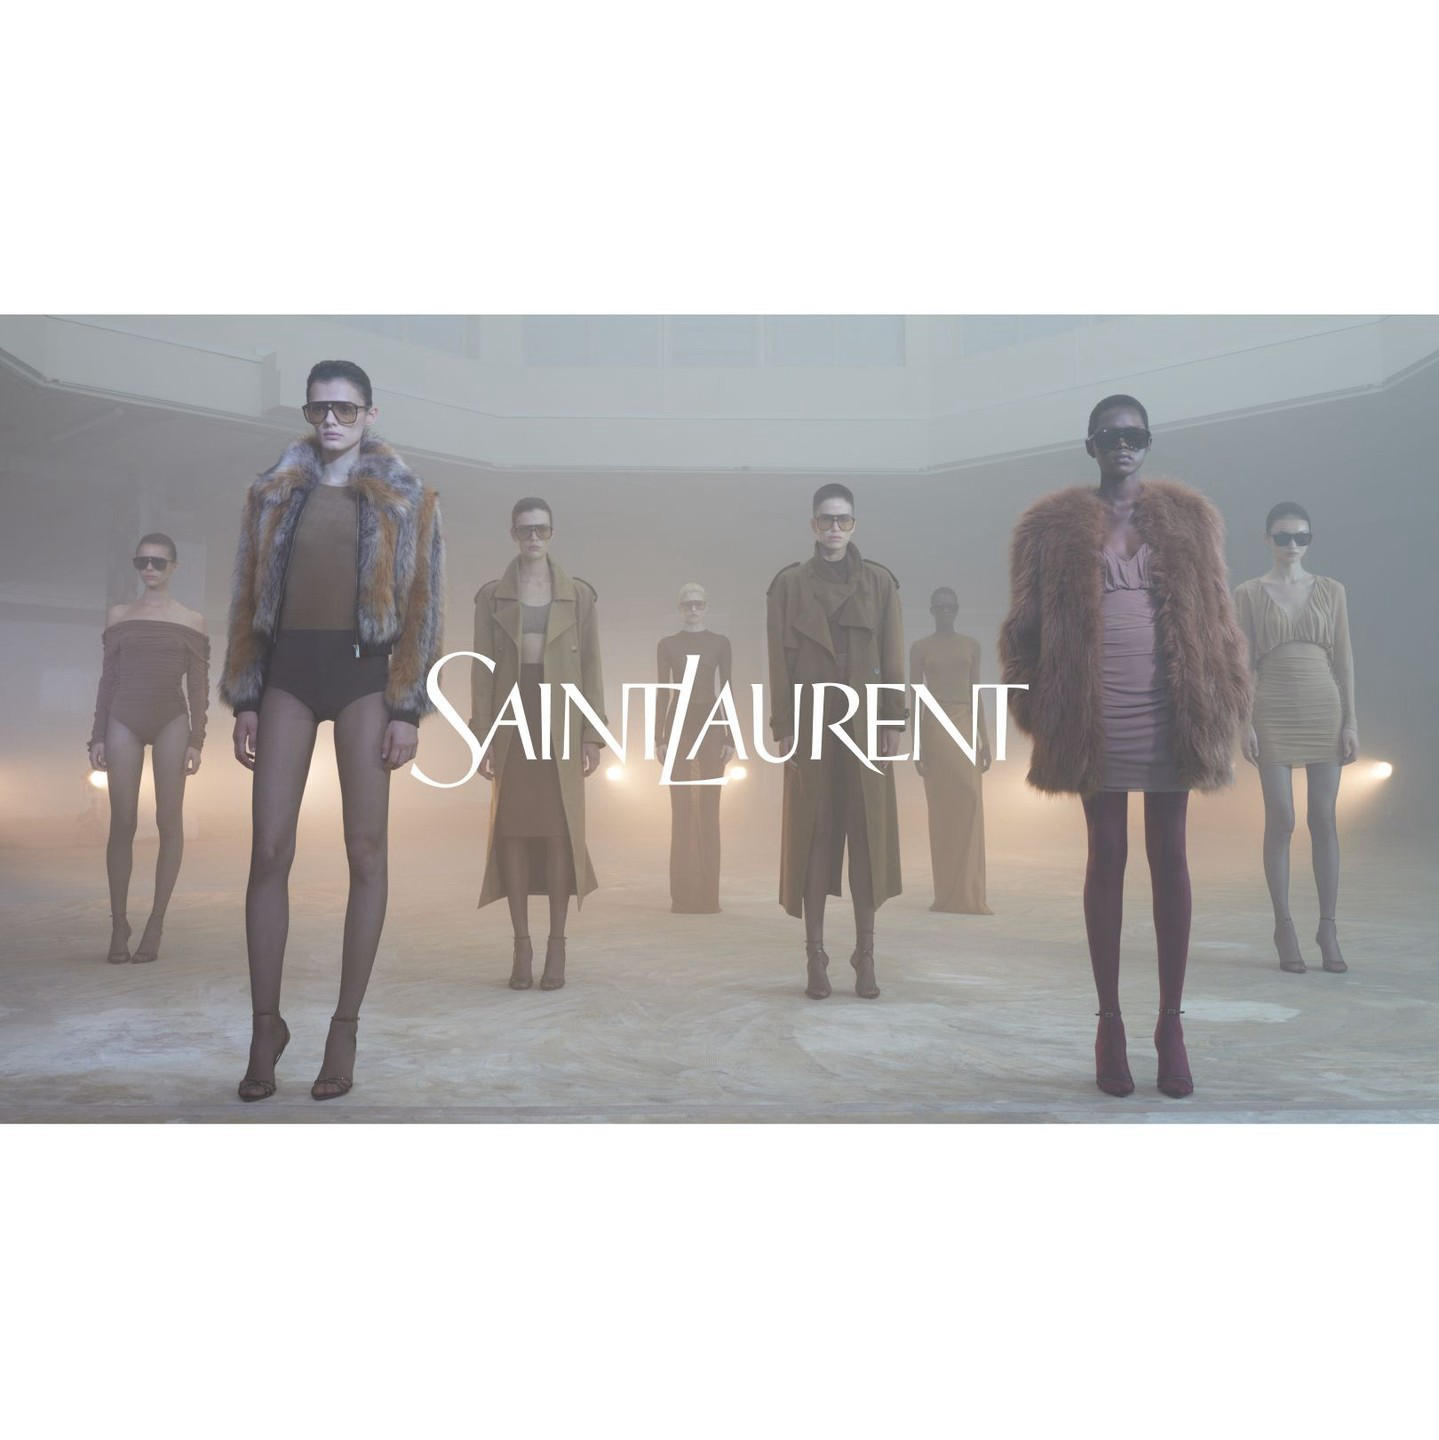 SAINT LAURENT - Spring 23⁣⁣⁣⁣⁣by Anthony Vaccarello⁣⁣⁣⁣Photographed by Vanessa Beecroft⁣⁣⁣⁣⁣#YSL #Sa